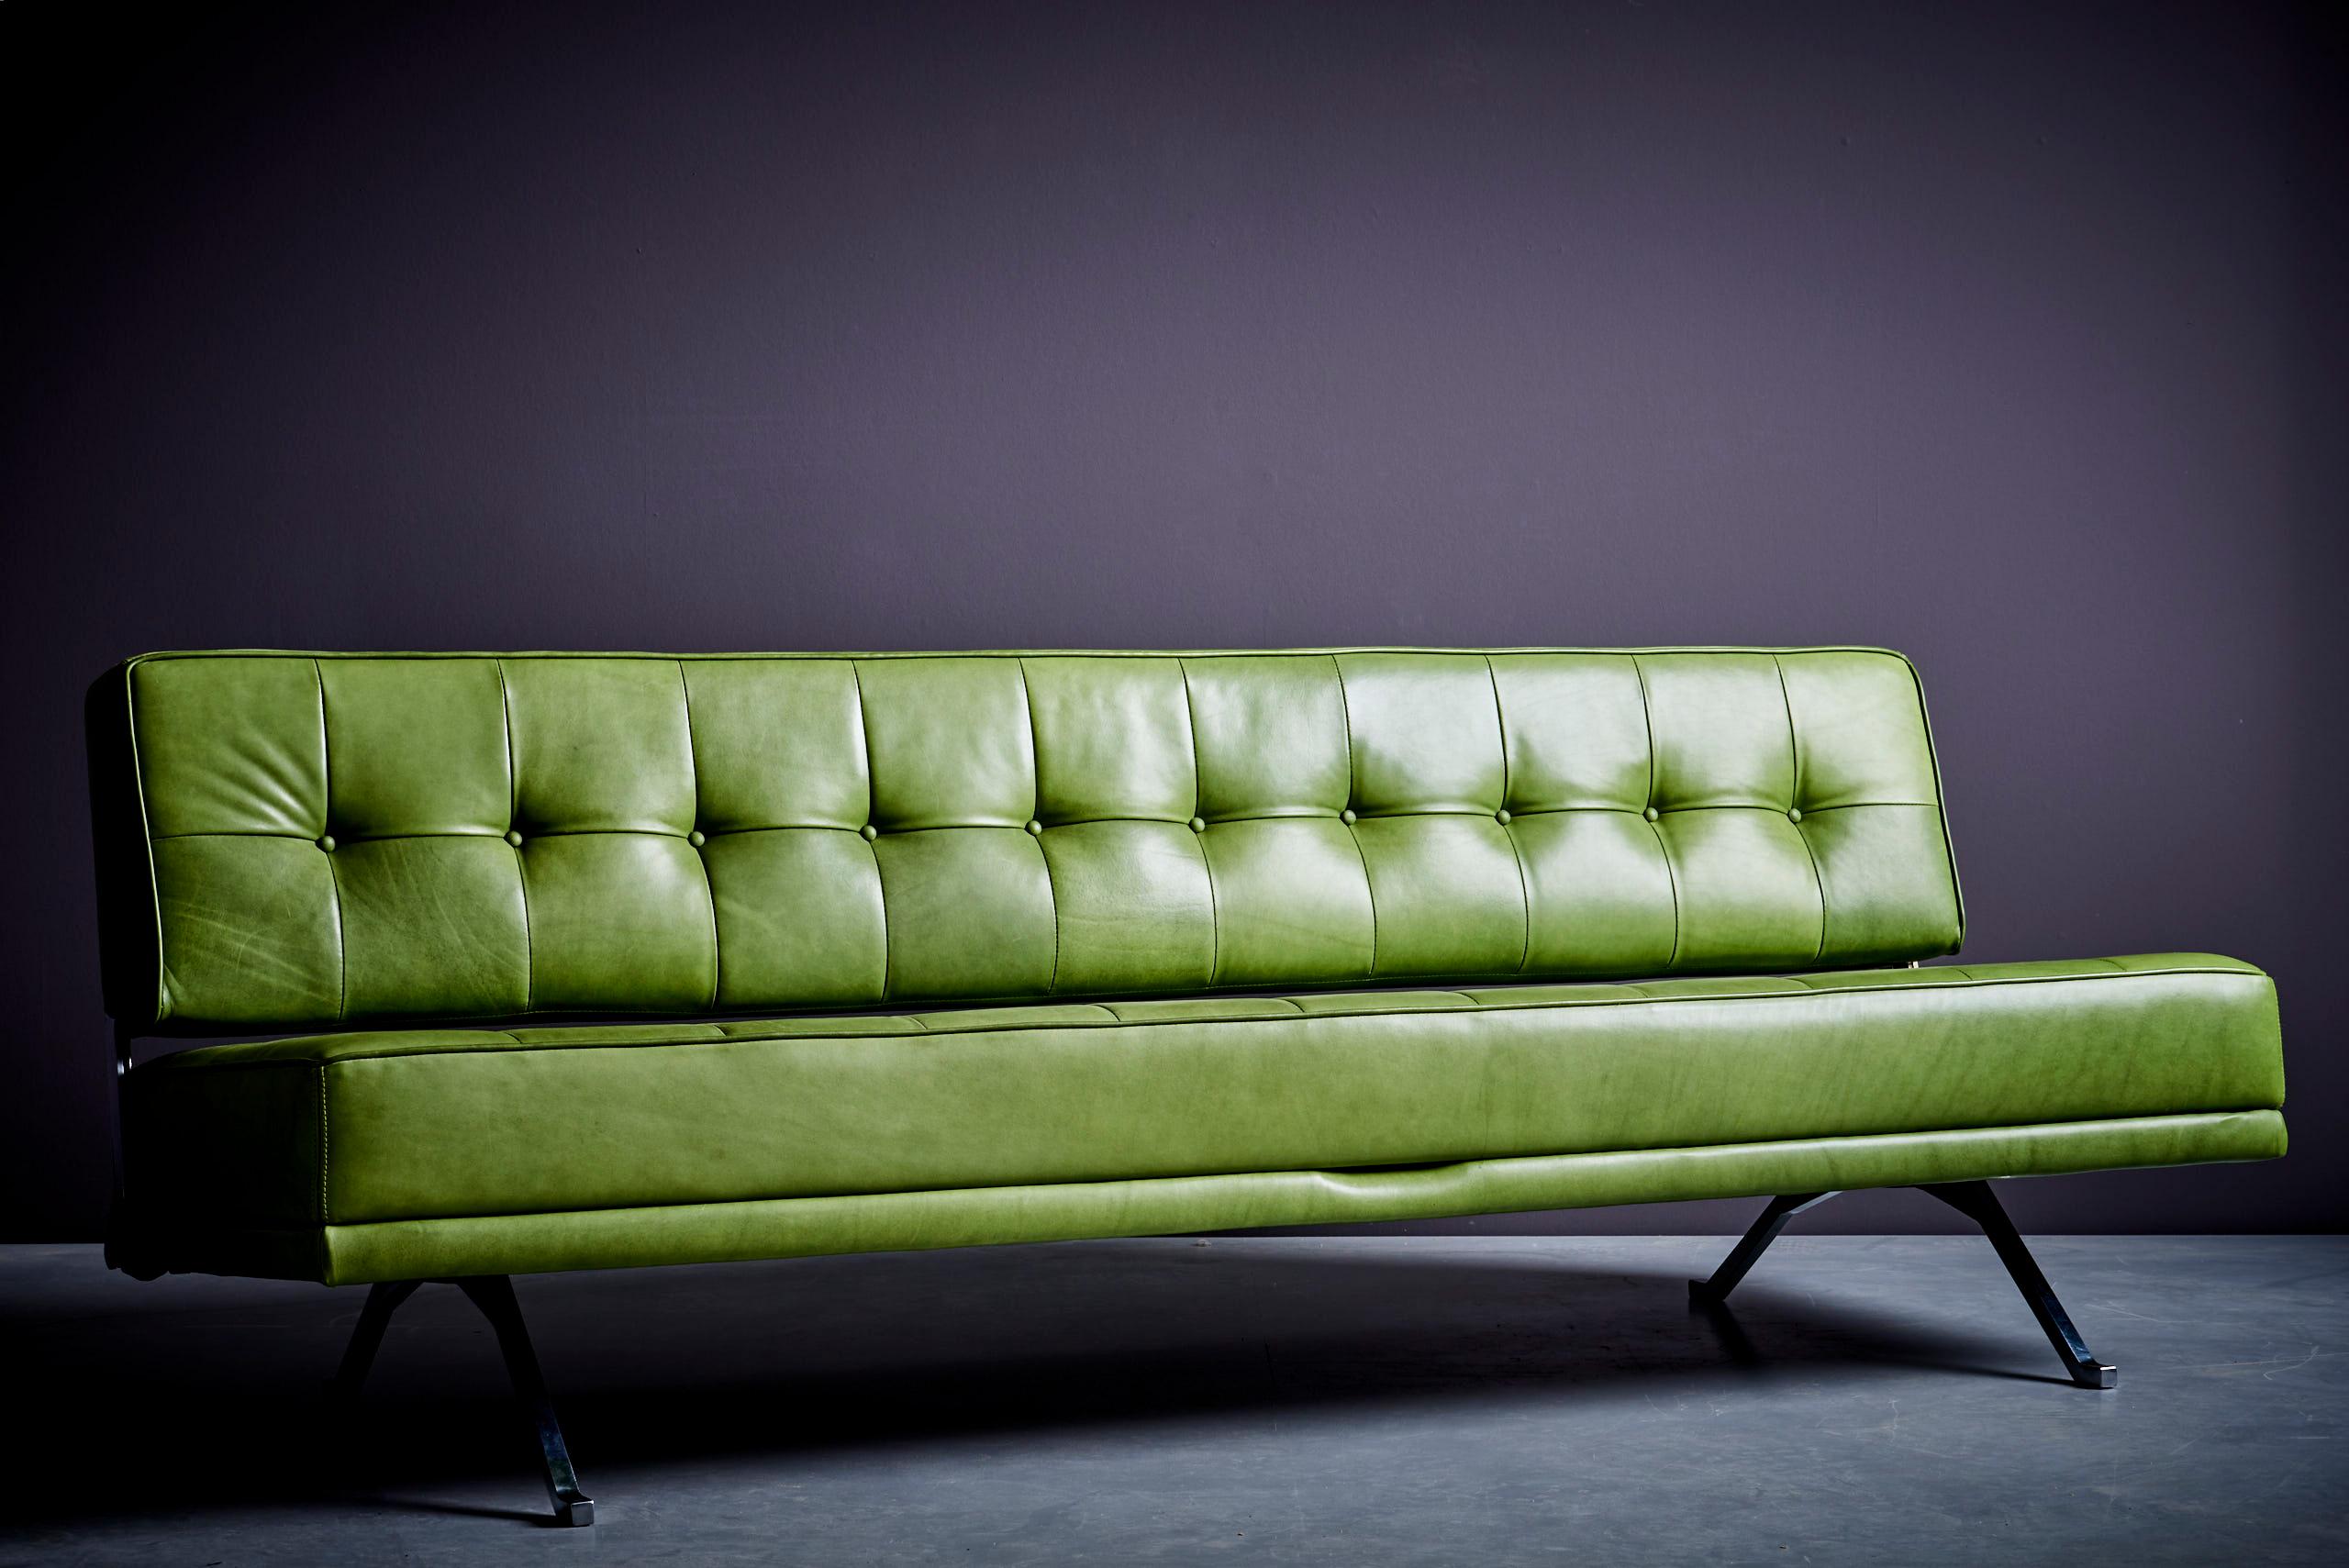 Steel Reupholstered Johannes Spalt Sofa Daybed for Wittmann, 1960s in green leather  For Sale